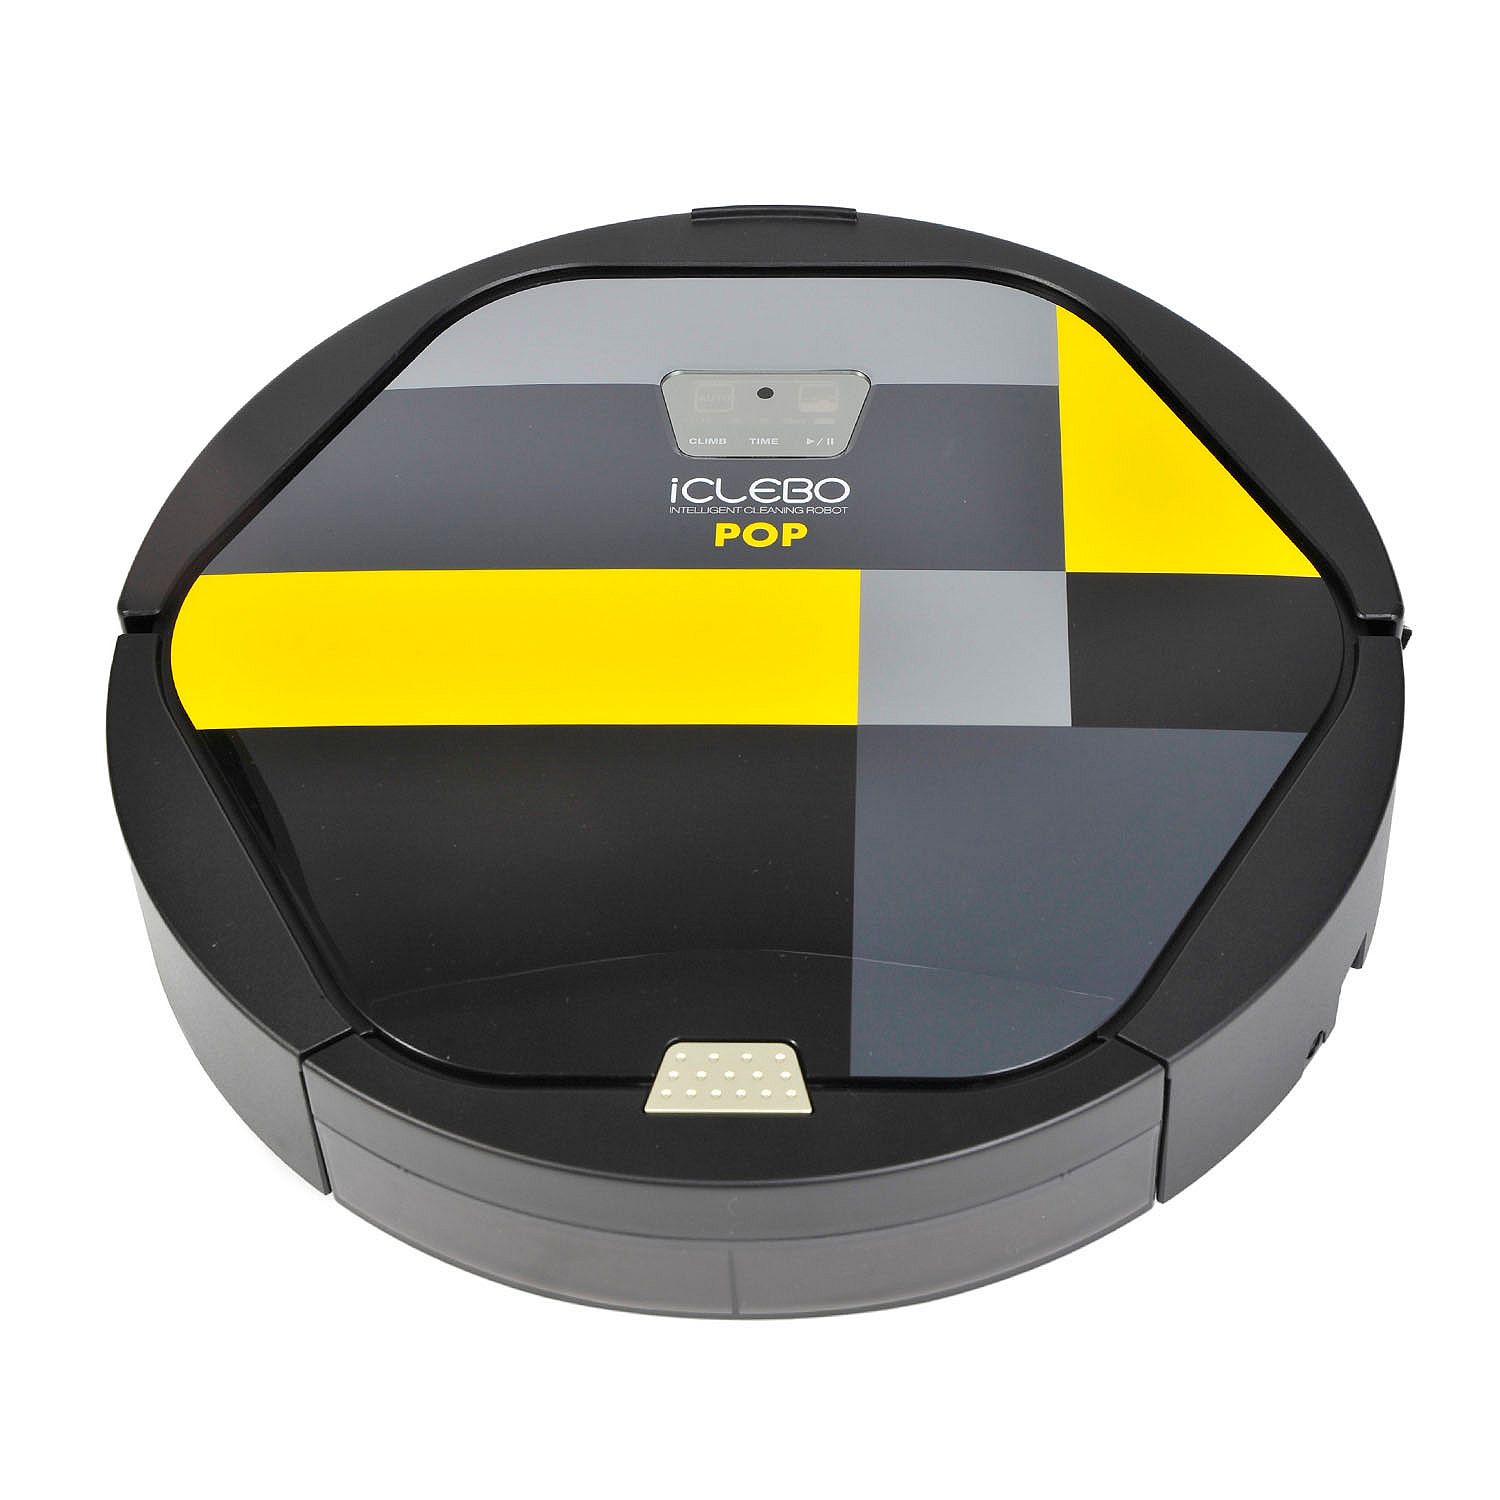 iCLEBO YCR-M05-P2 Pop Robotic Vacuum Cleaner with Triple Intensive Cleaning System